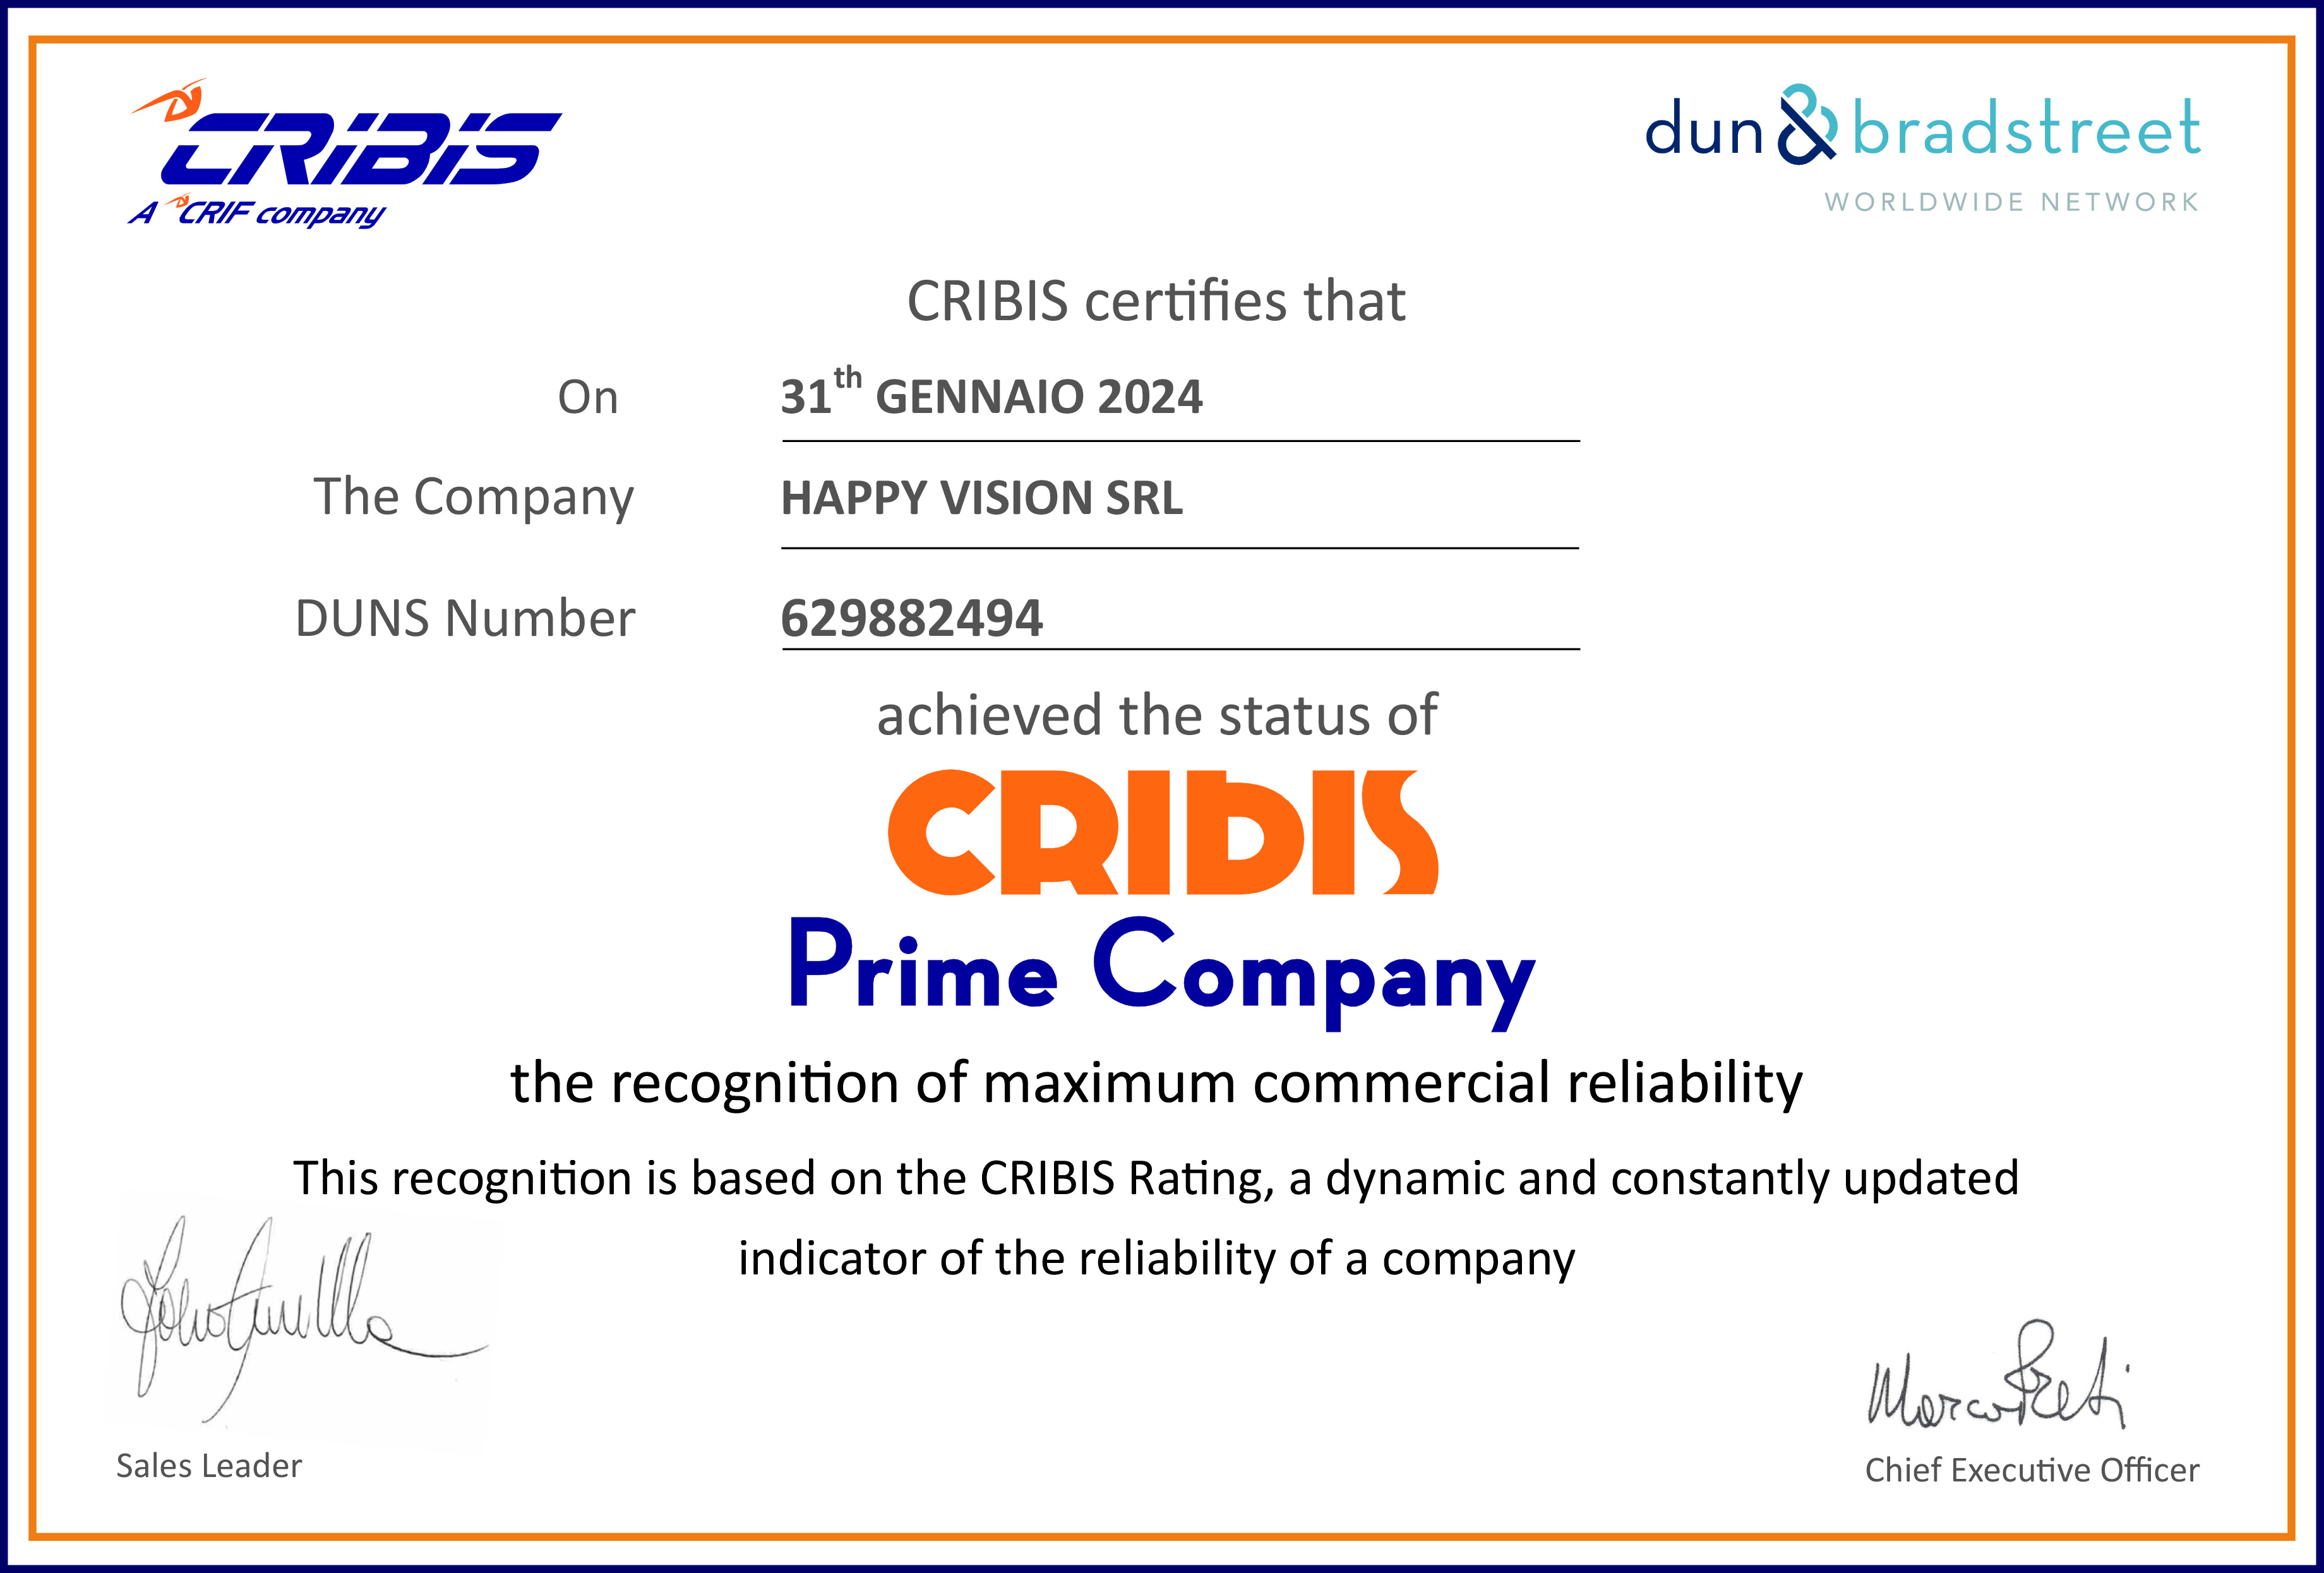 CRIBIS: HAPPY VISION IS A PRIME COMPANY